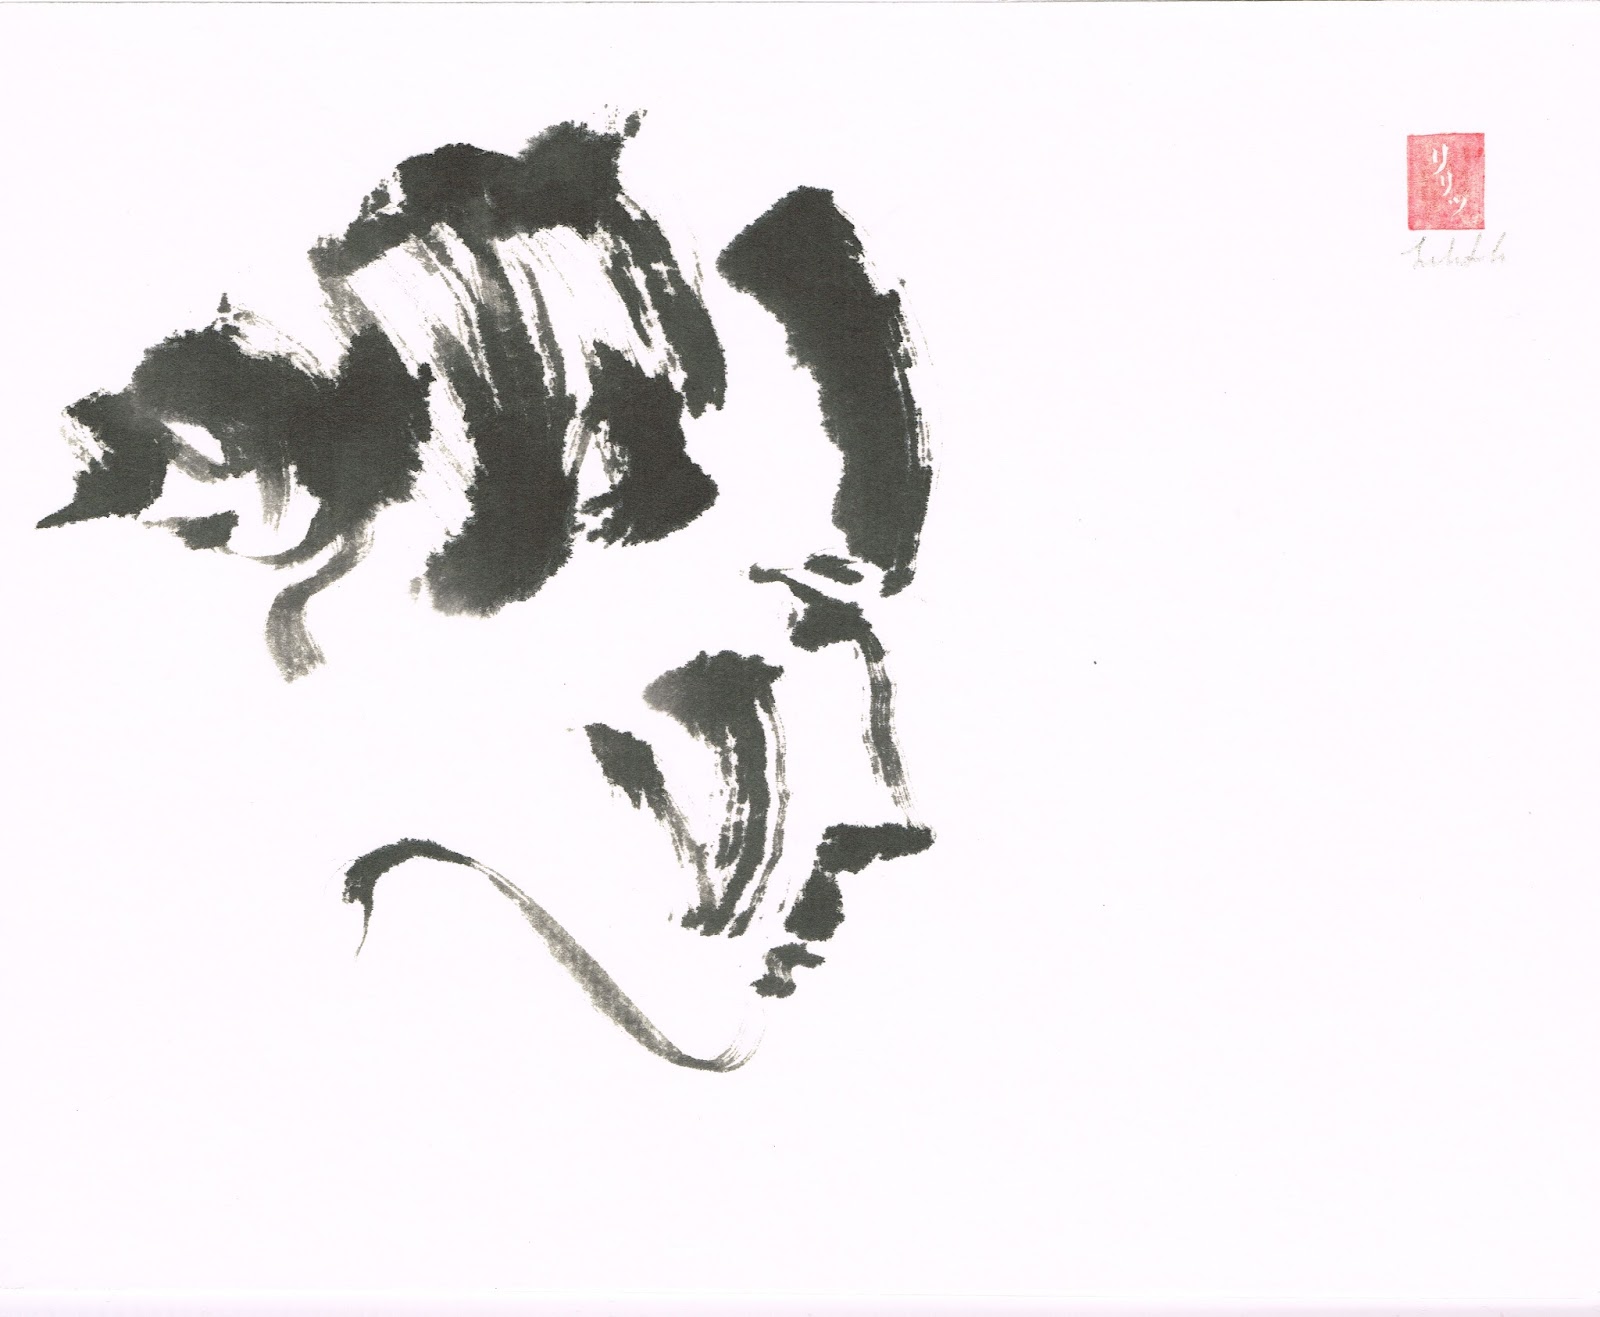 Yield To Be Whole sumi-e painting of face in black ink